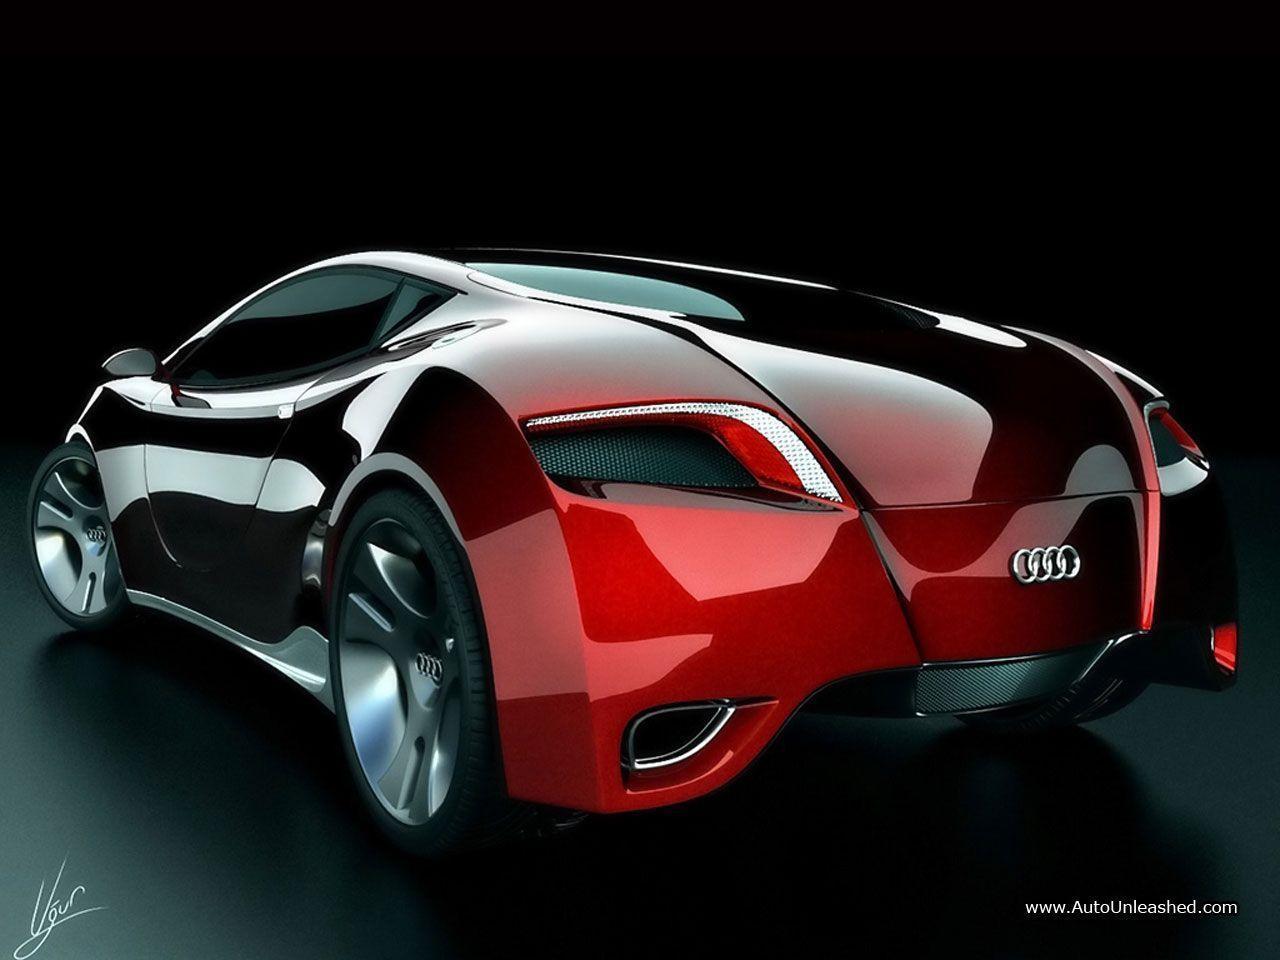 concept car wallpaper. Cars Wallpaper And Picture car image